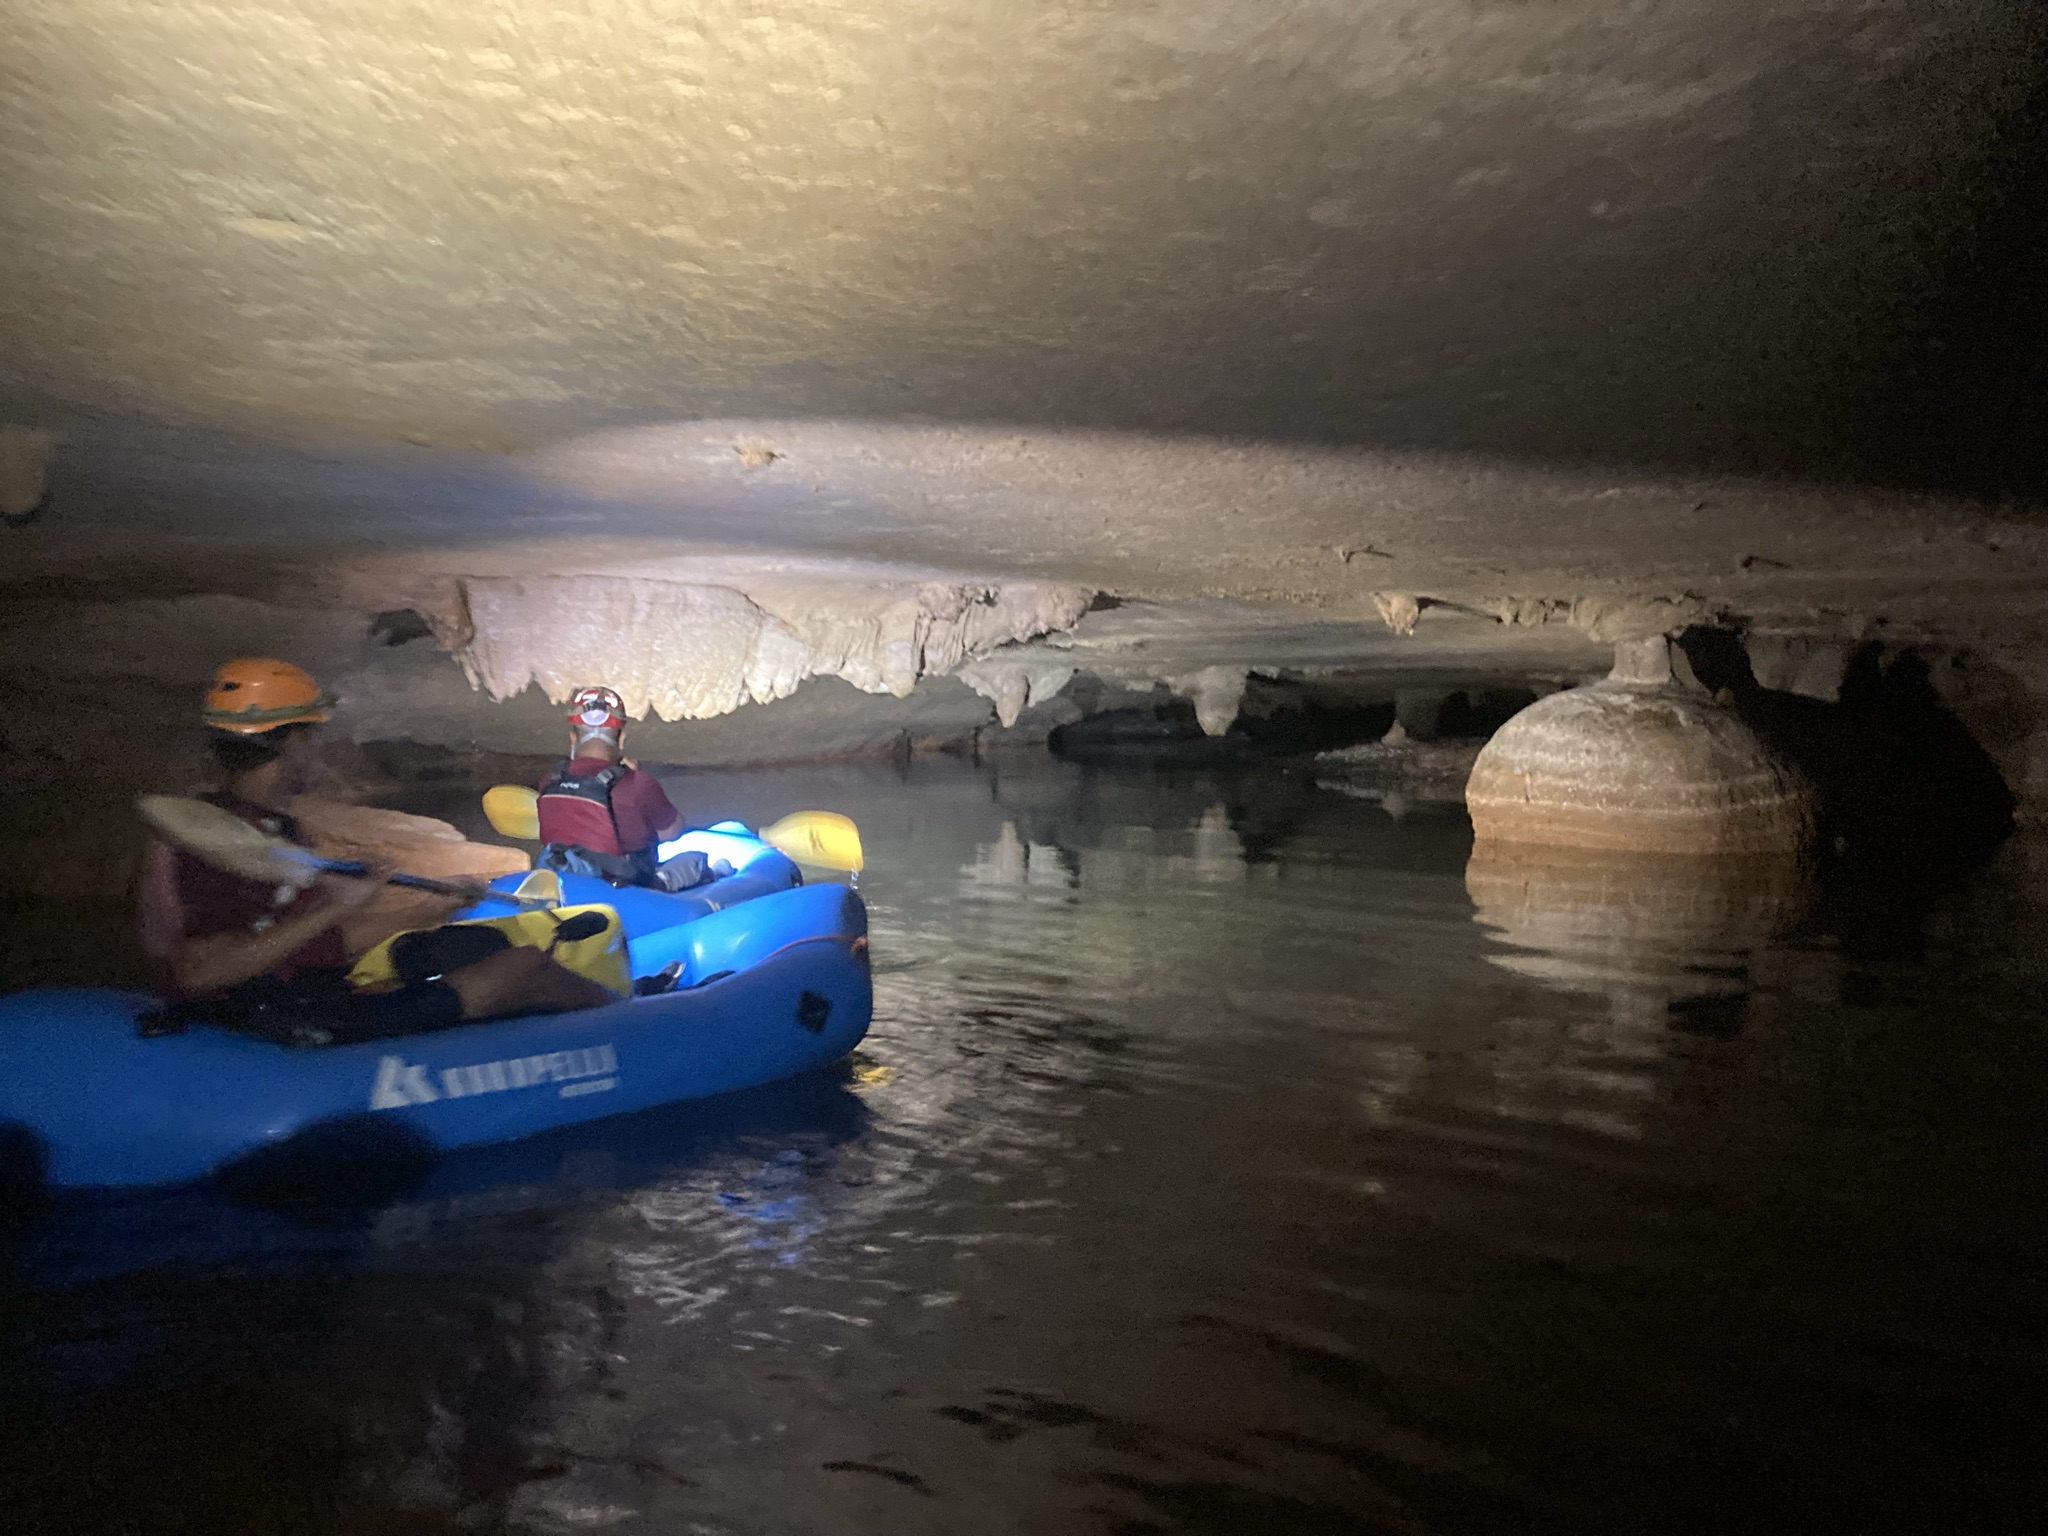 Tube kayaks on the water in a dark cave